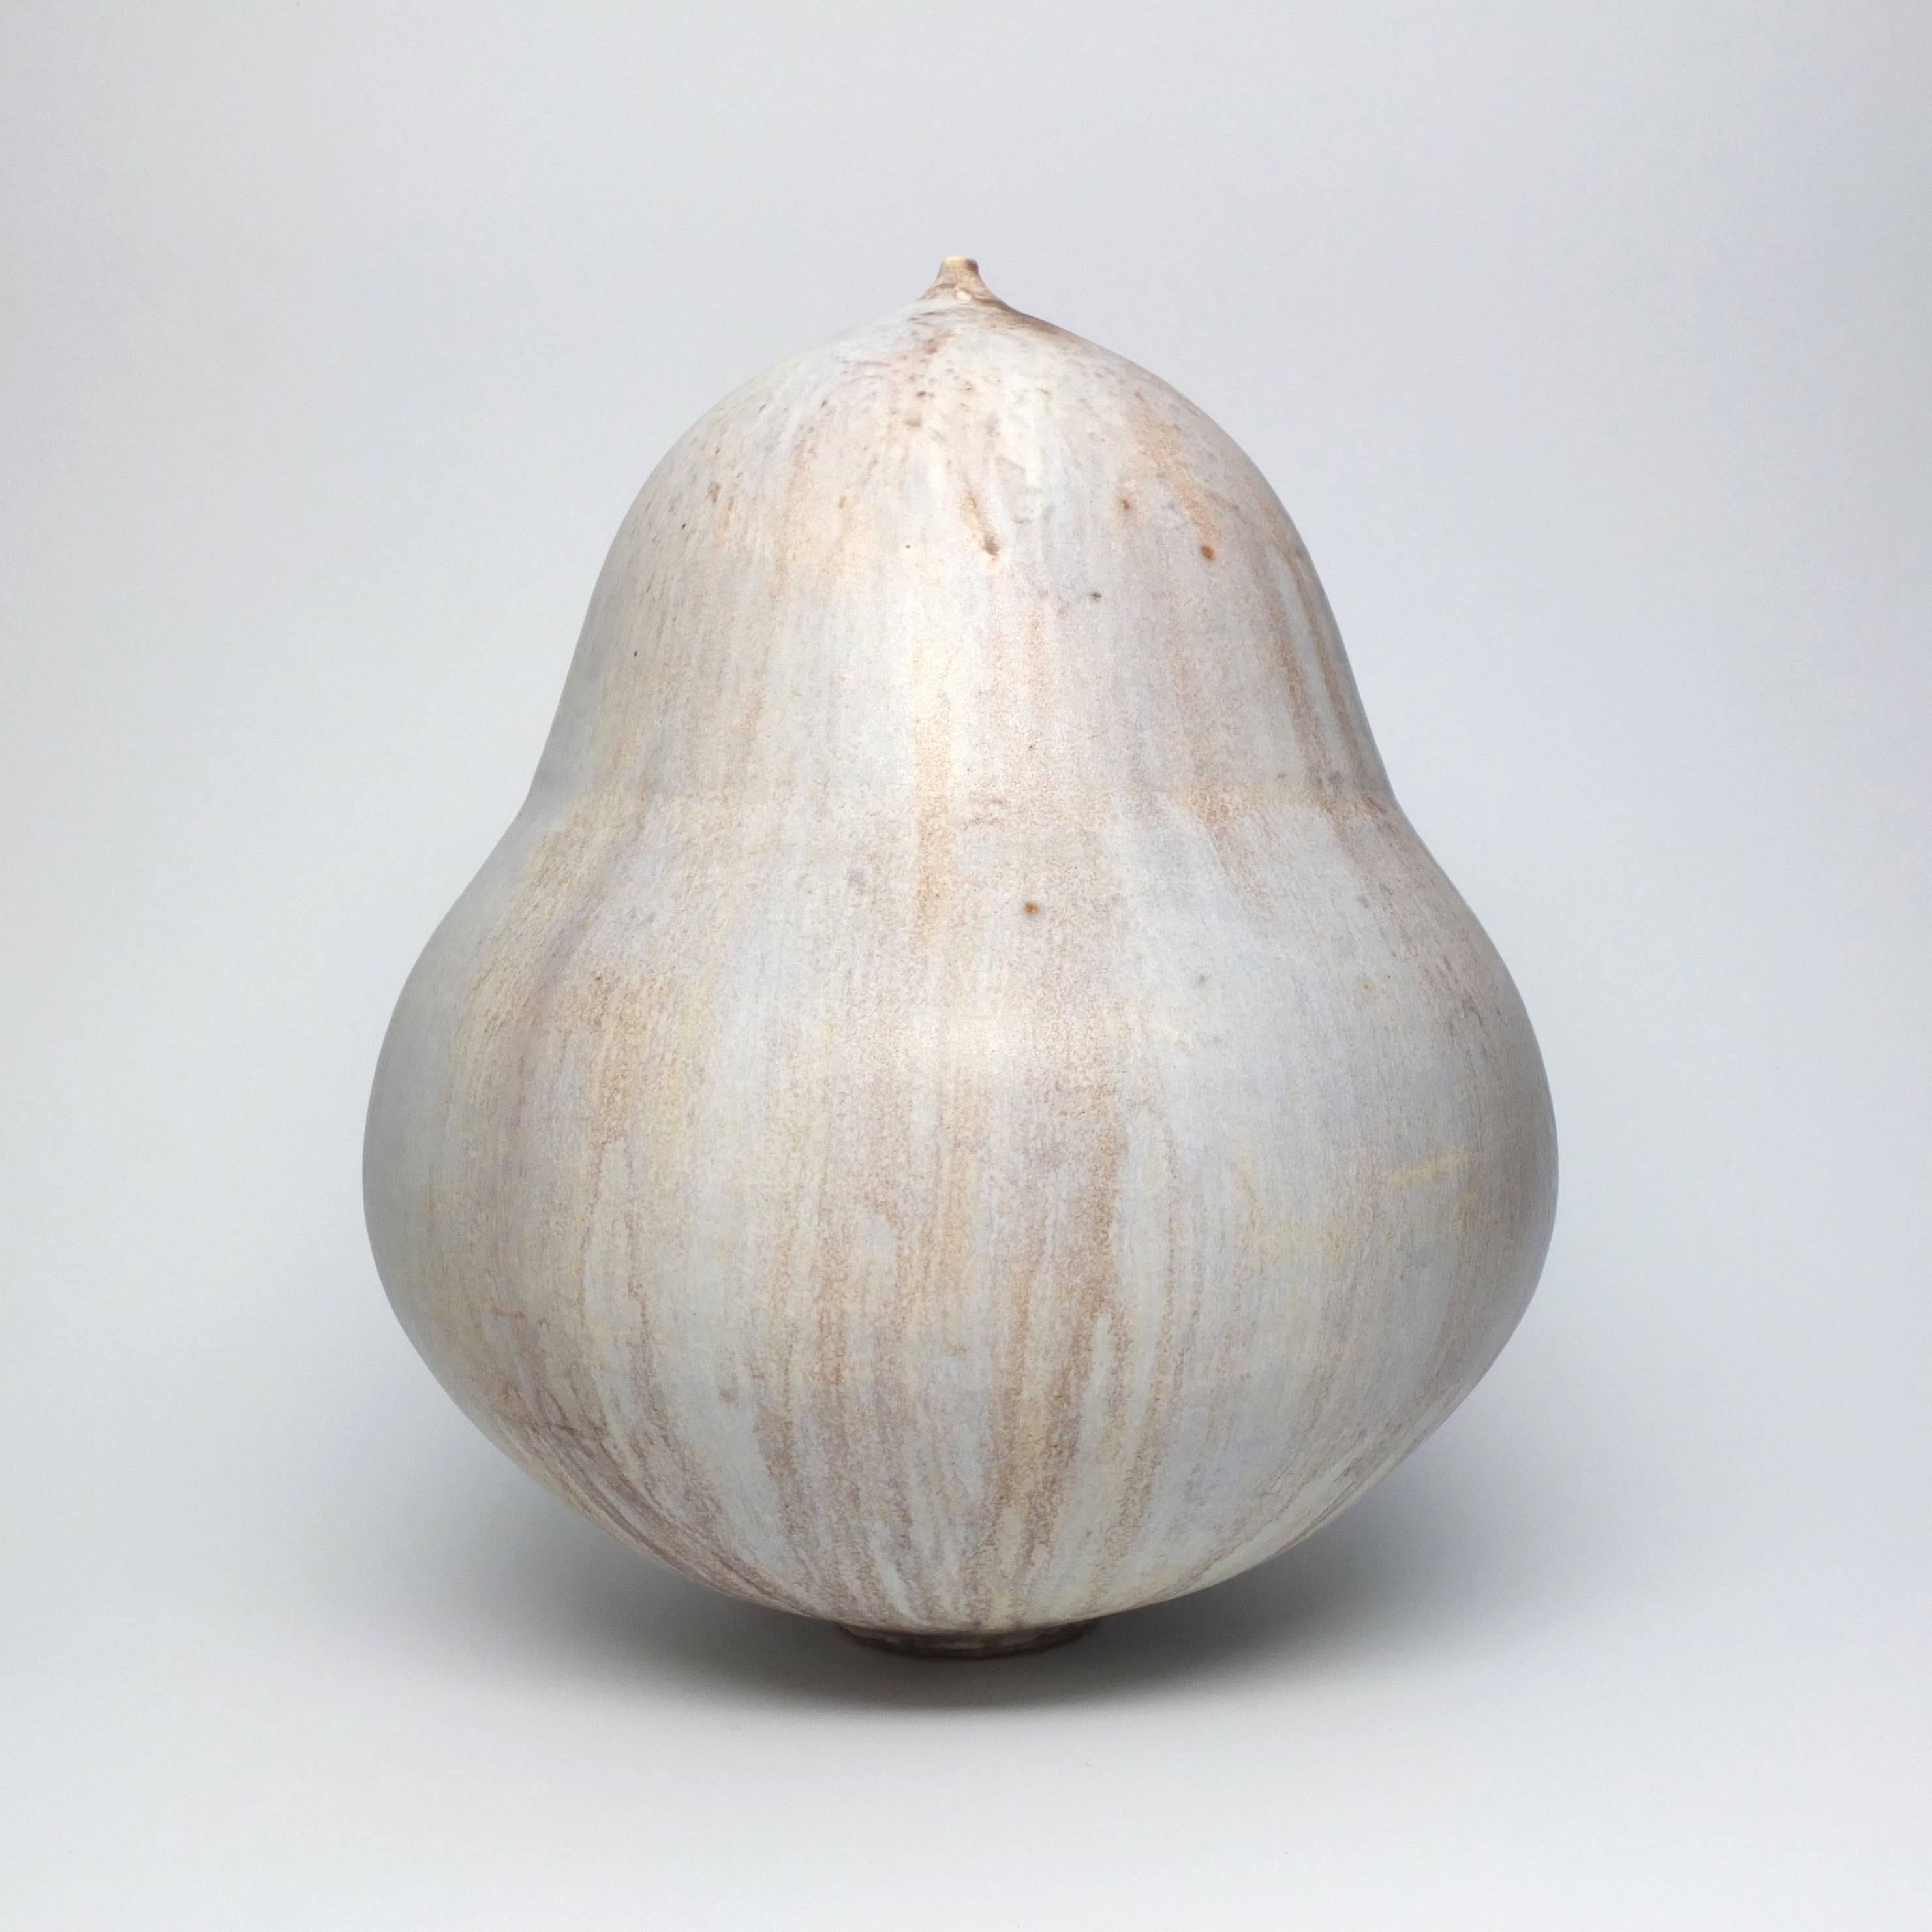 Artist Bio:
New York based artist, Jeffrey Loura, creates organic, elemental vessels. Jeffrey moved to New York in 1996 to earn his BFA at Parsons School of Design, where he studied Illustration. He began throwing ceramics five years later in 2001.